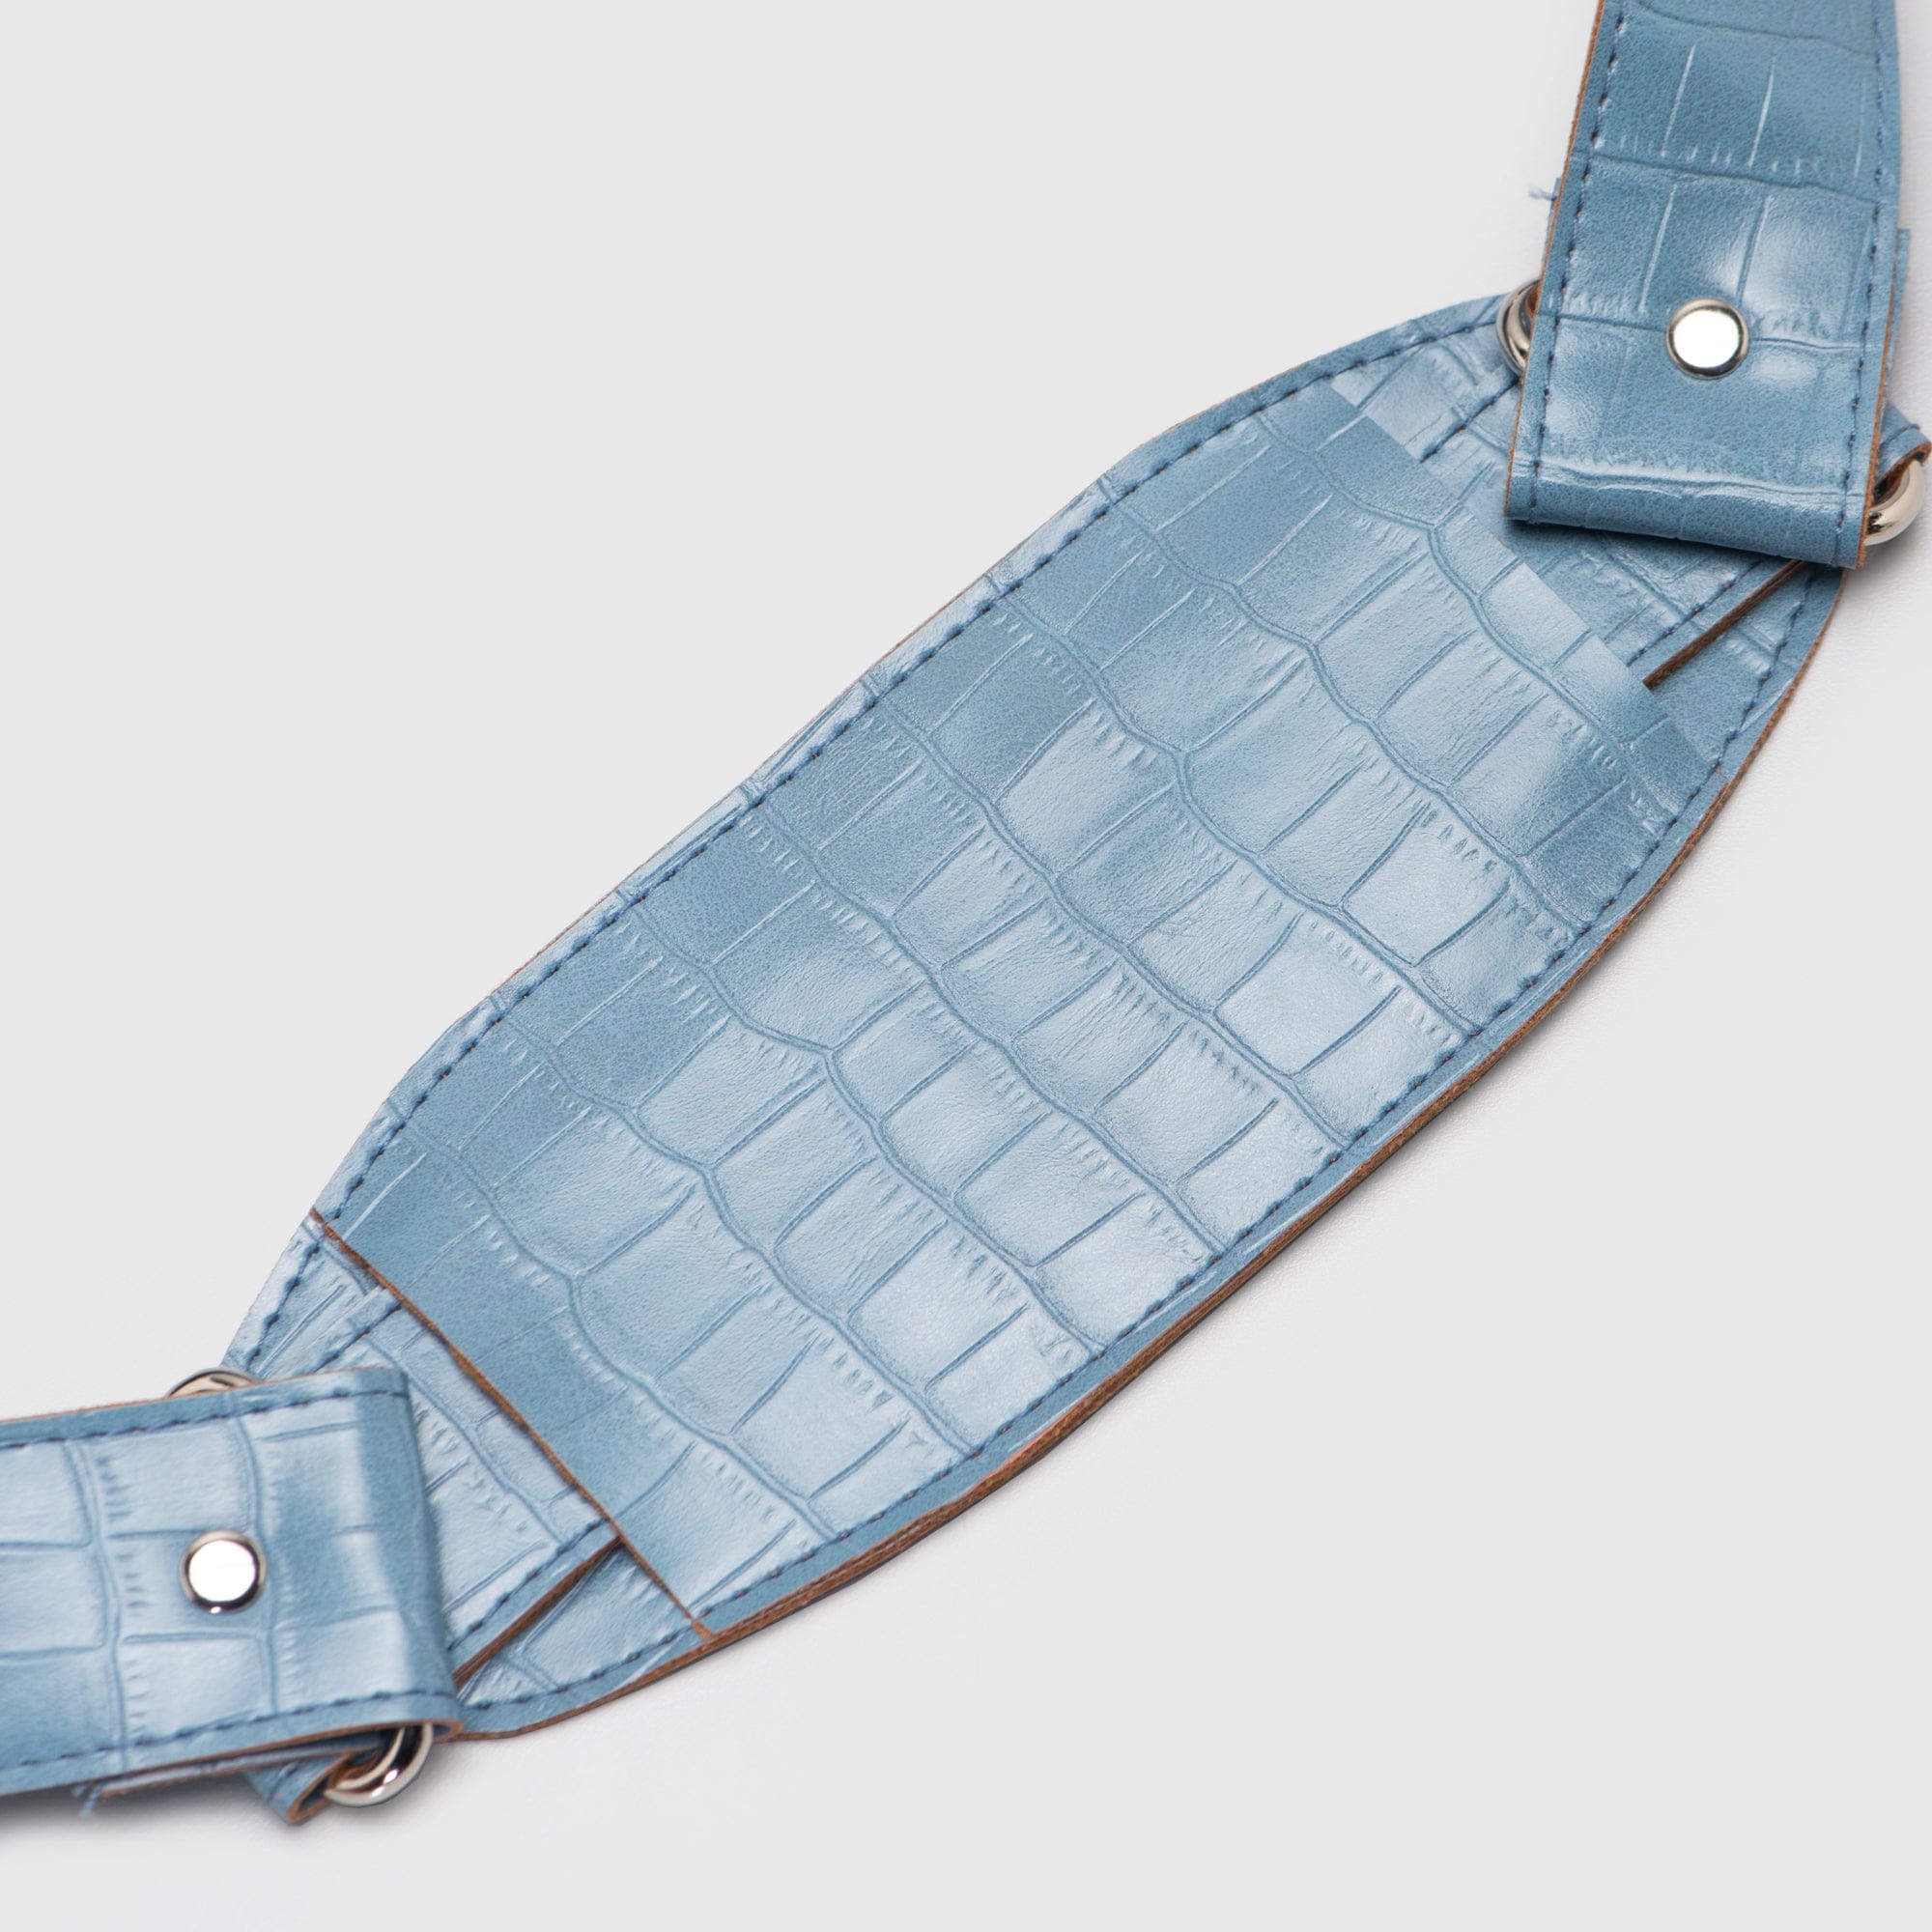 Adorable Projects Official Sling Bag Kimberly Sling Bag Croco Denim